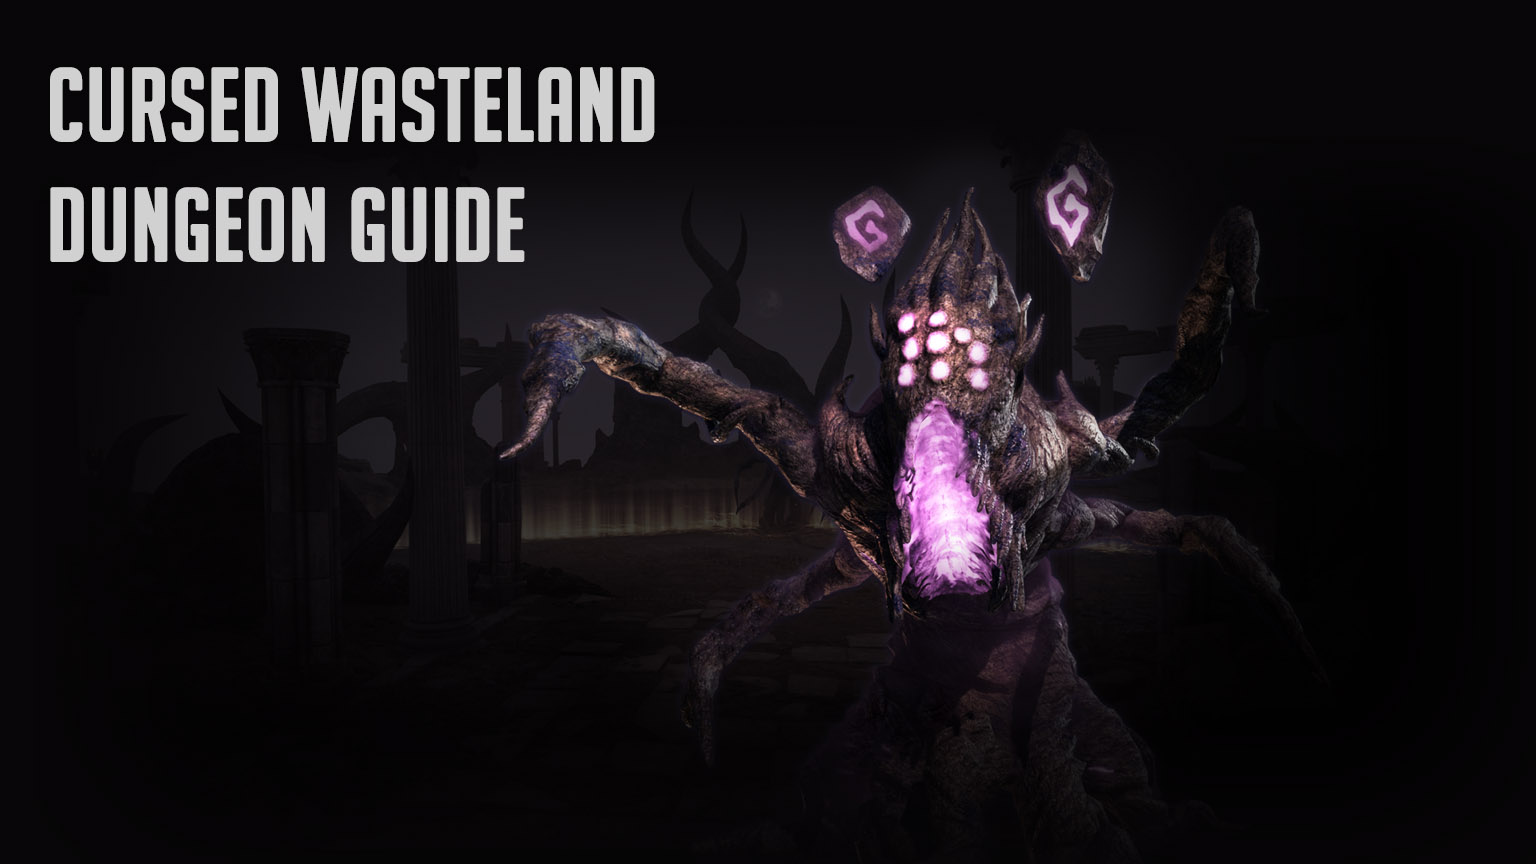 Currsed Wasteland Dungeon Guide Throne & Liberty